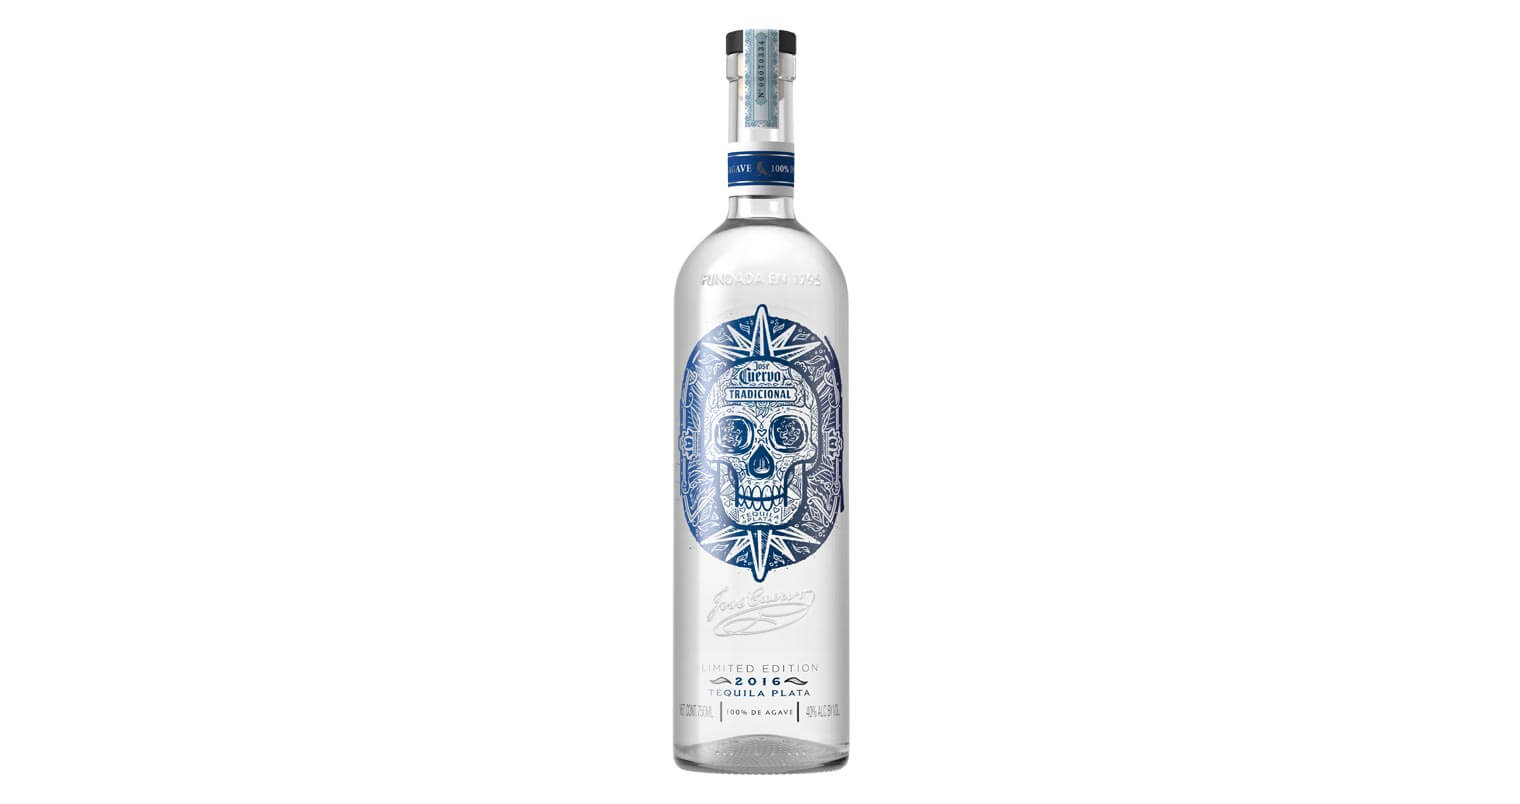 Jose Cuervo Tradicional Launches Limited Edition Day of the Dead Inspired Tequila Bottle, feat